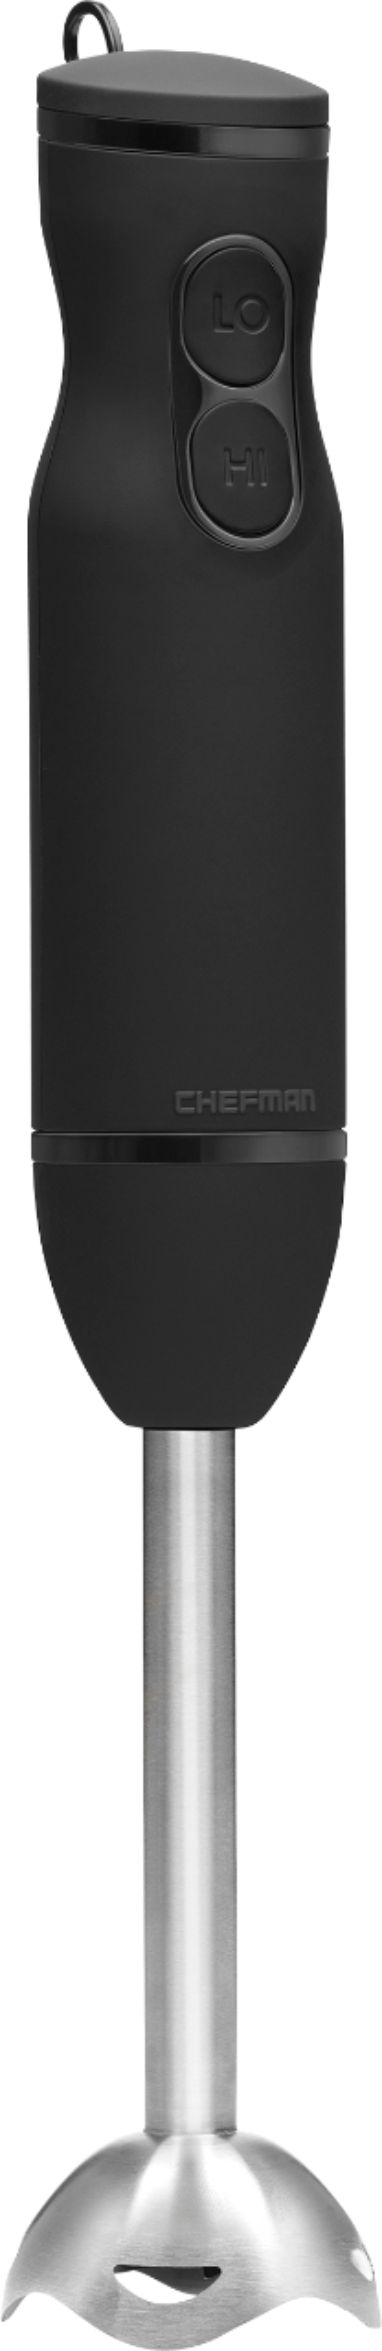 Left View: Chefman - Immersion Stick Hand Blender with Stainless Steel Blades - BLACK